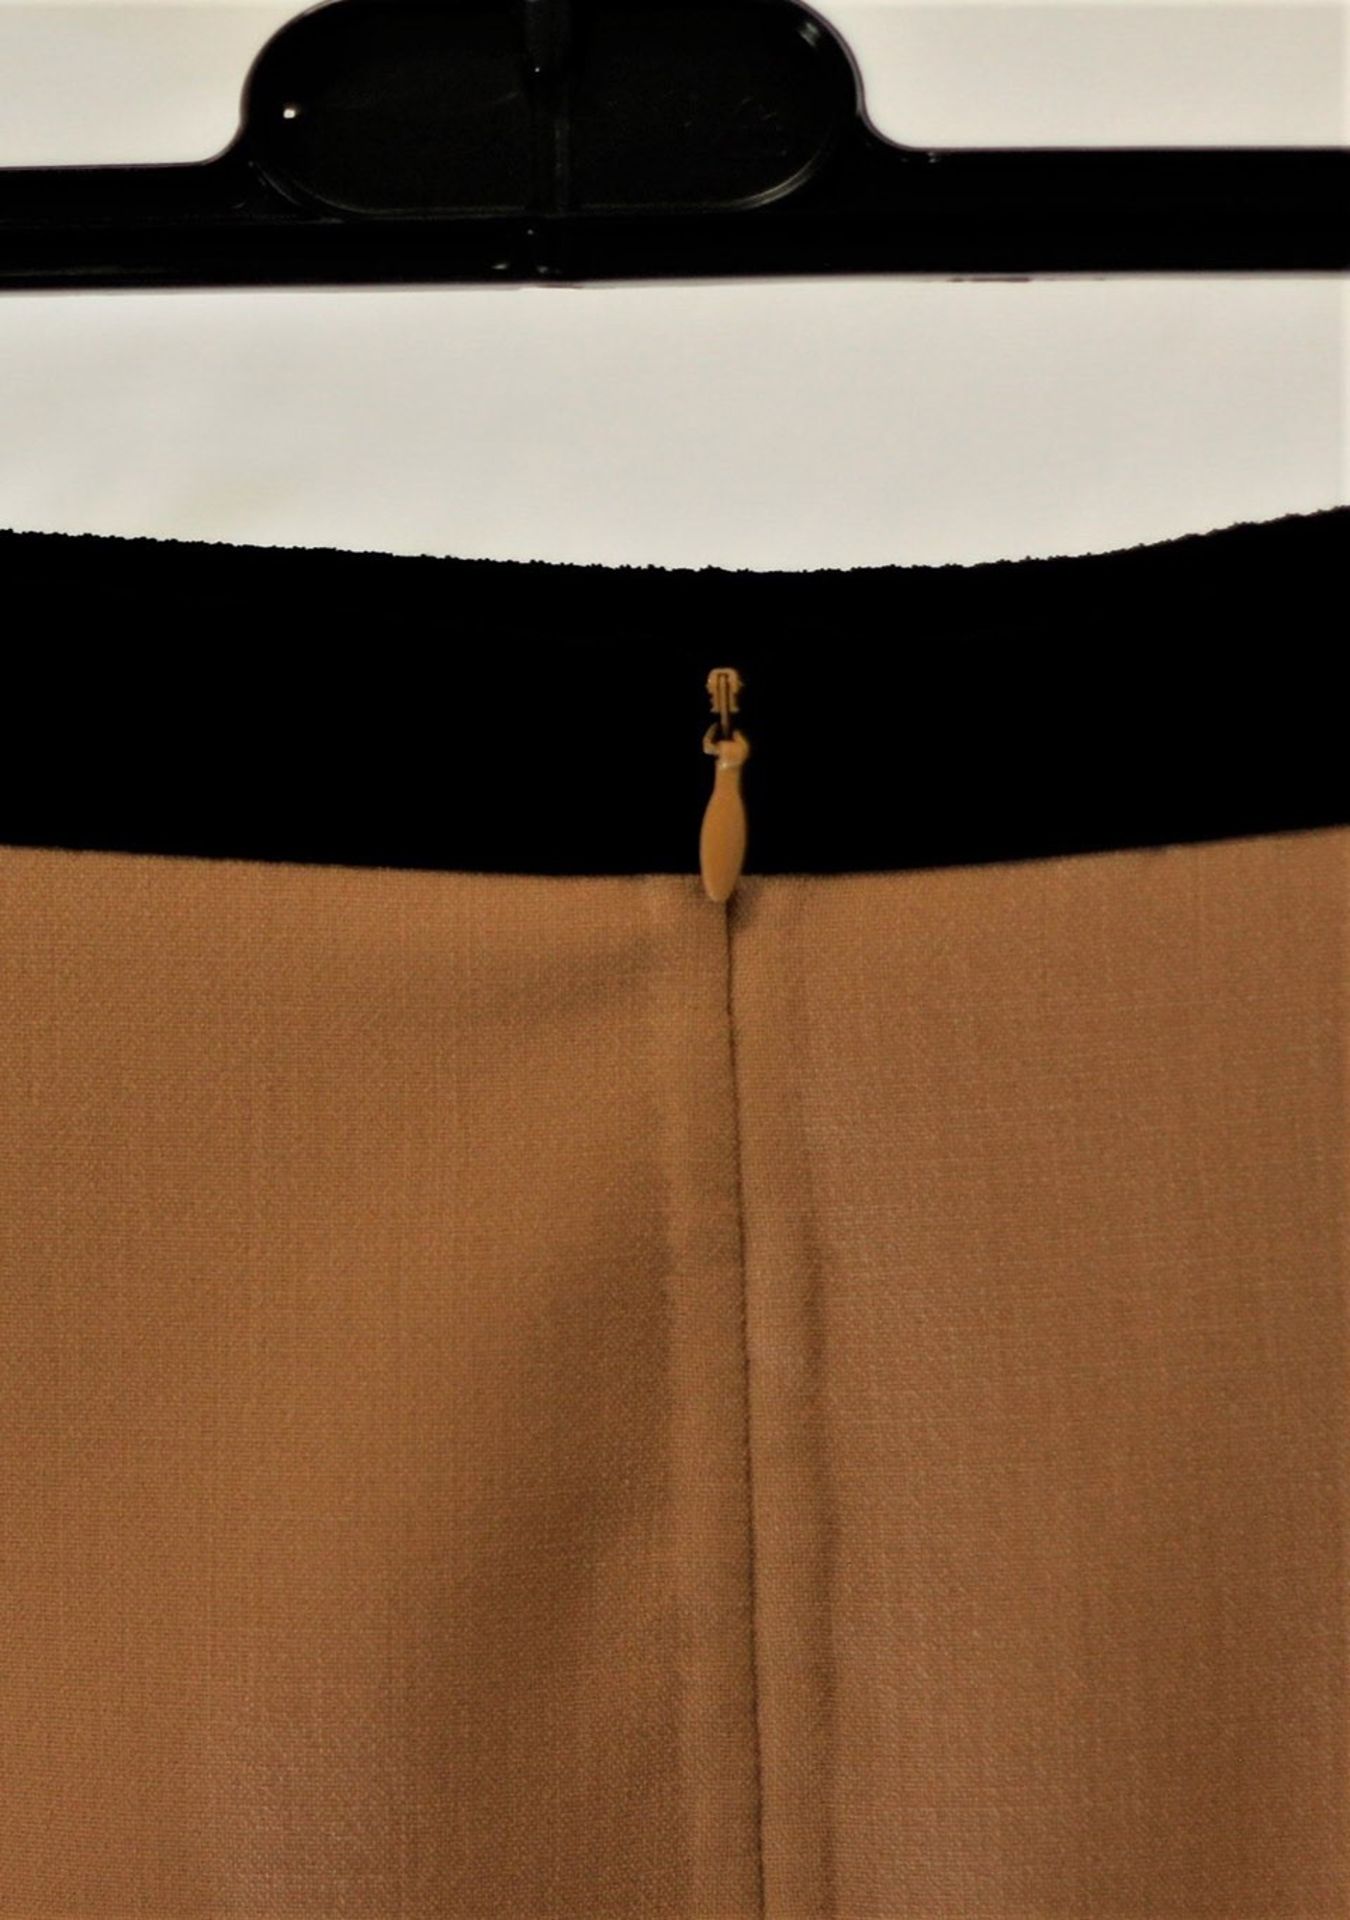 1 x Michael Kors Suntan And Black Skirt - Size: 14 - Material: 96% Virgin Wool, 4% Spandex - From - Image 6 of 7